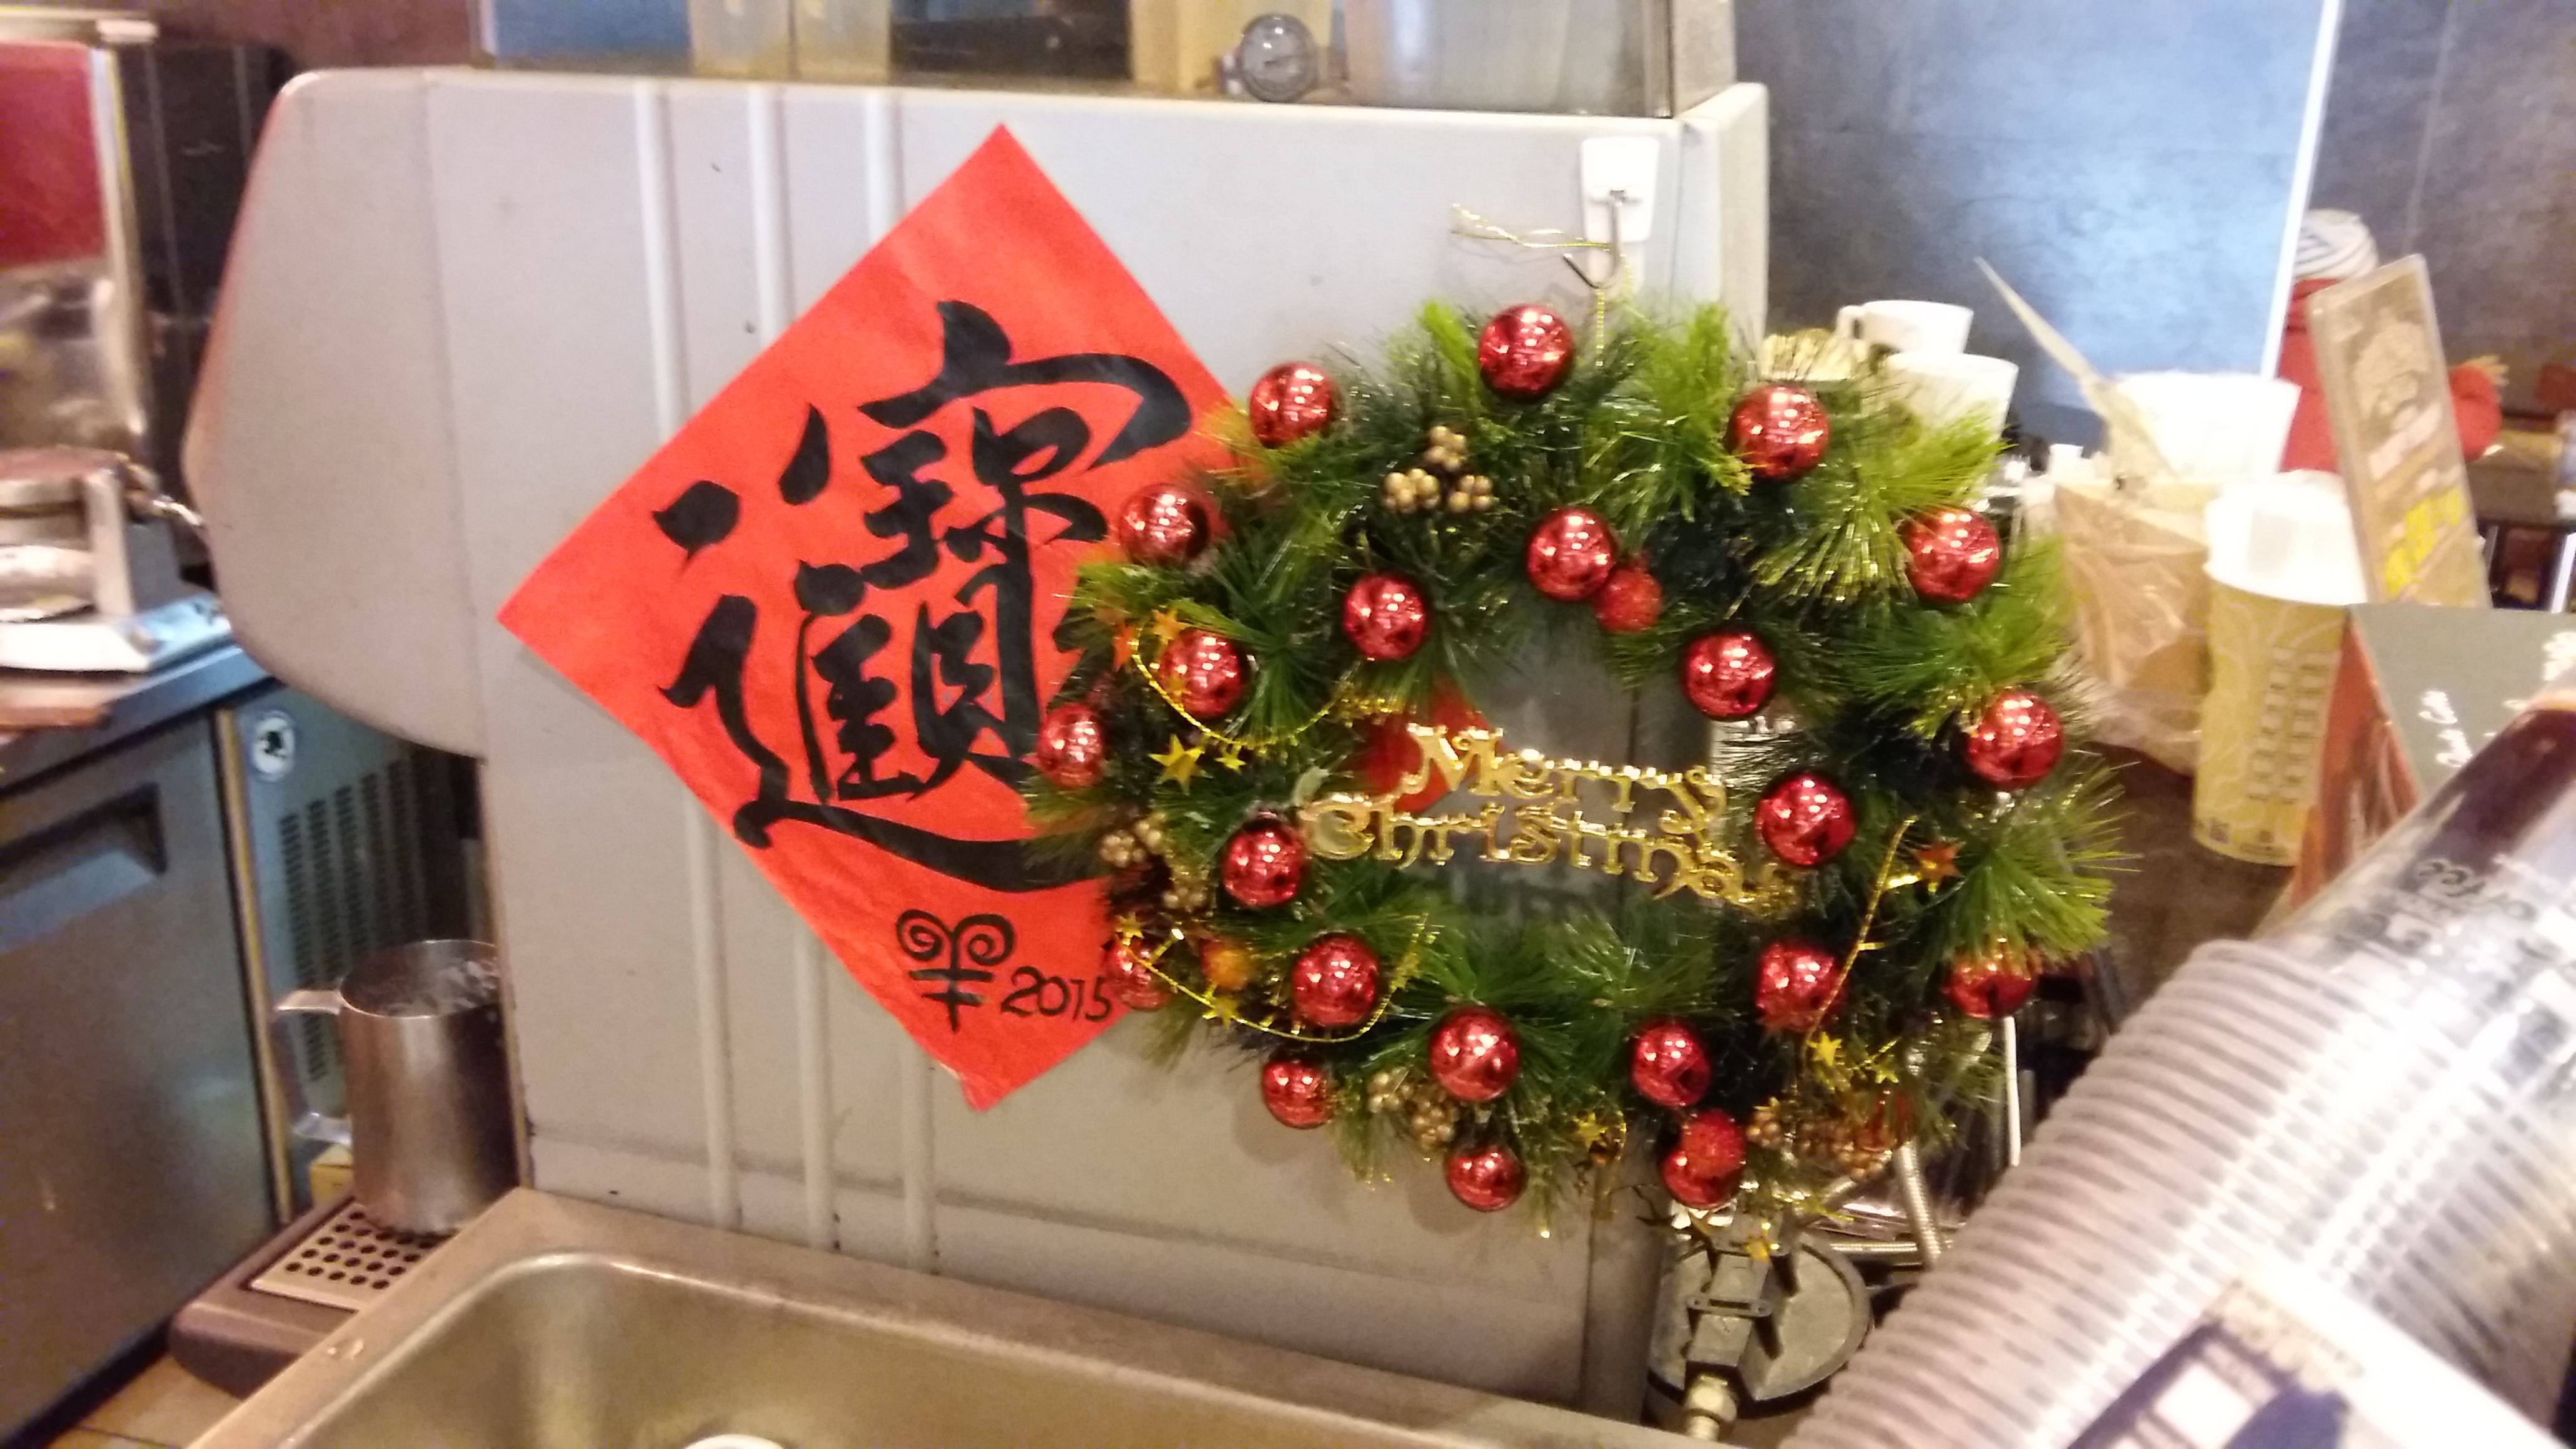 More on Xmas spirit in unusual places in Taiwan